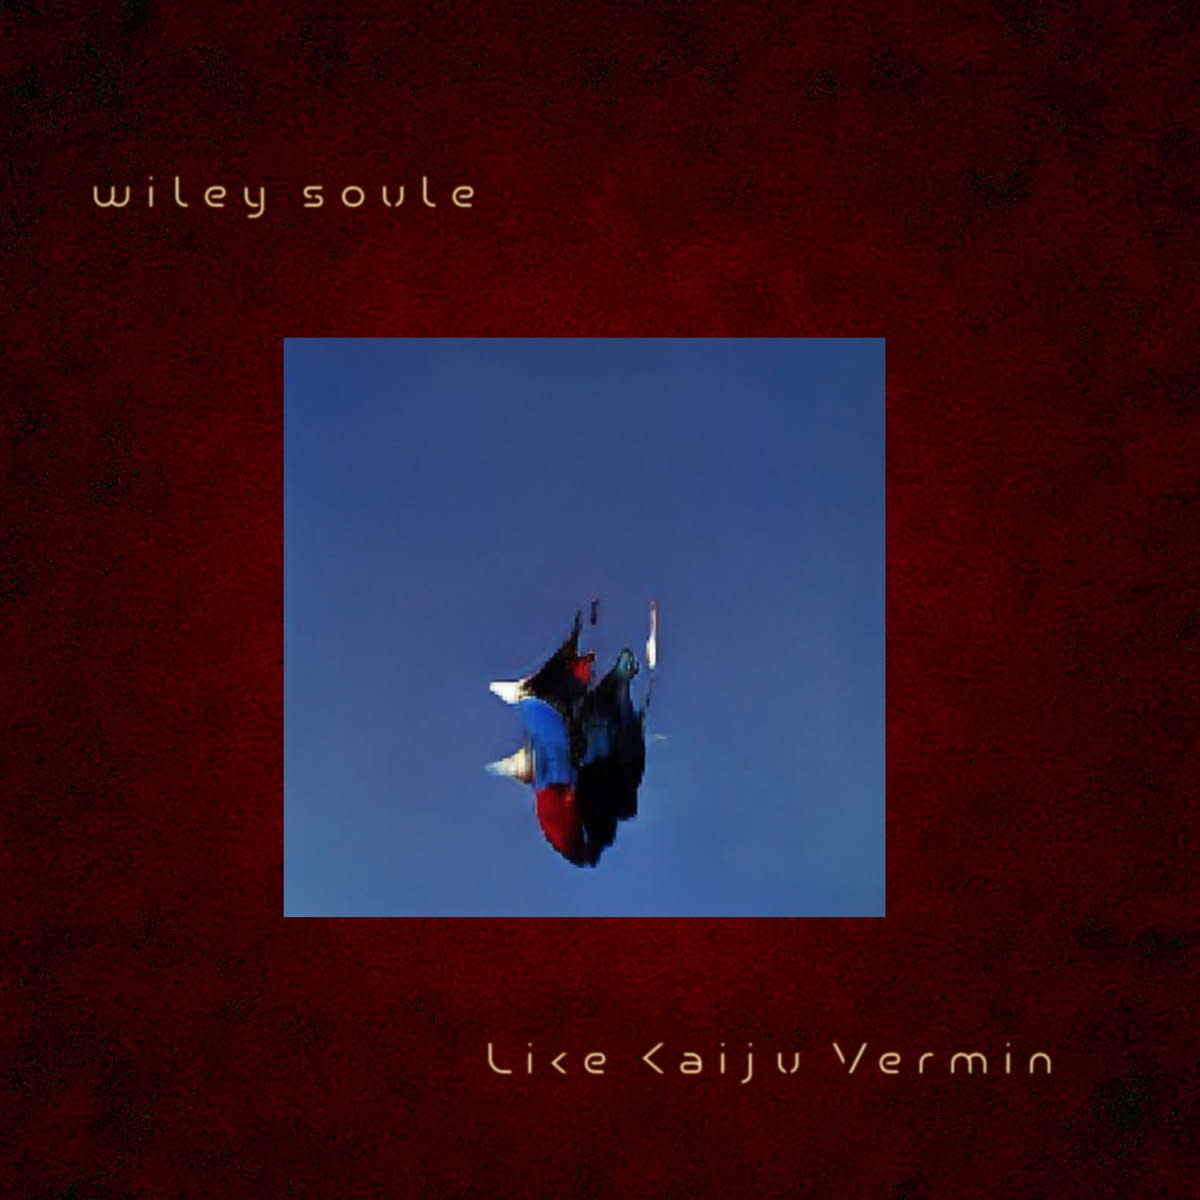 experimental-ep-review-like-kaiju-vermin-by-wiley-soule